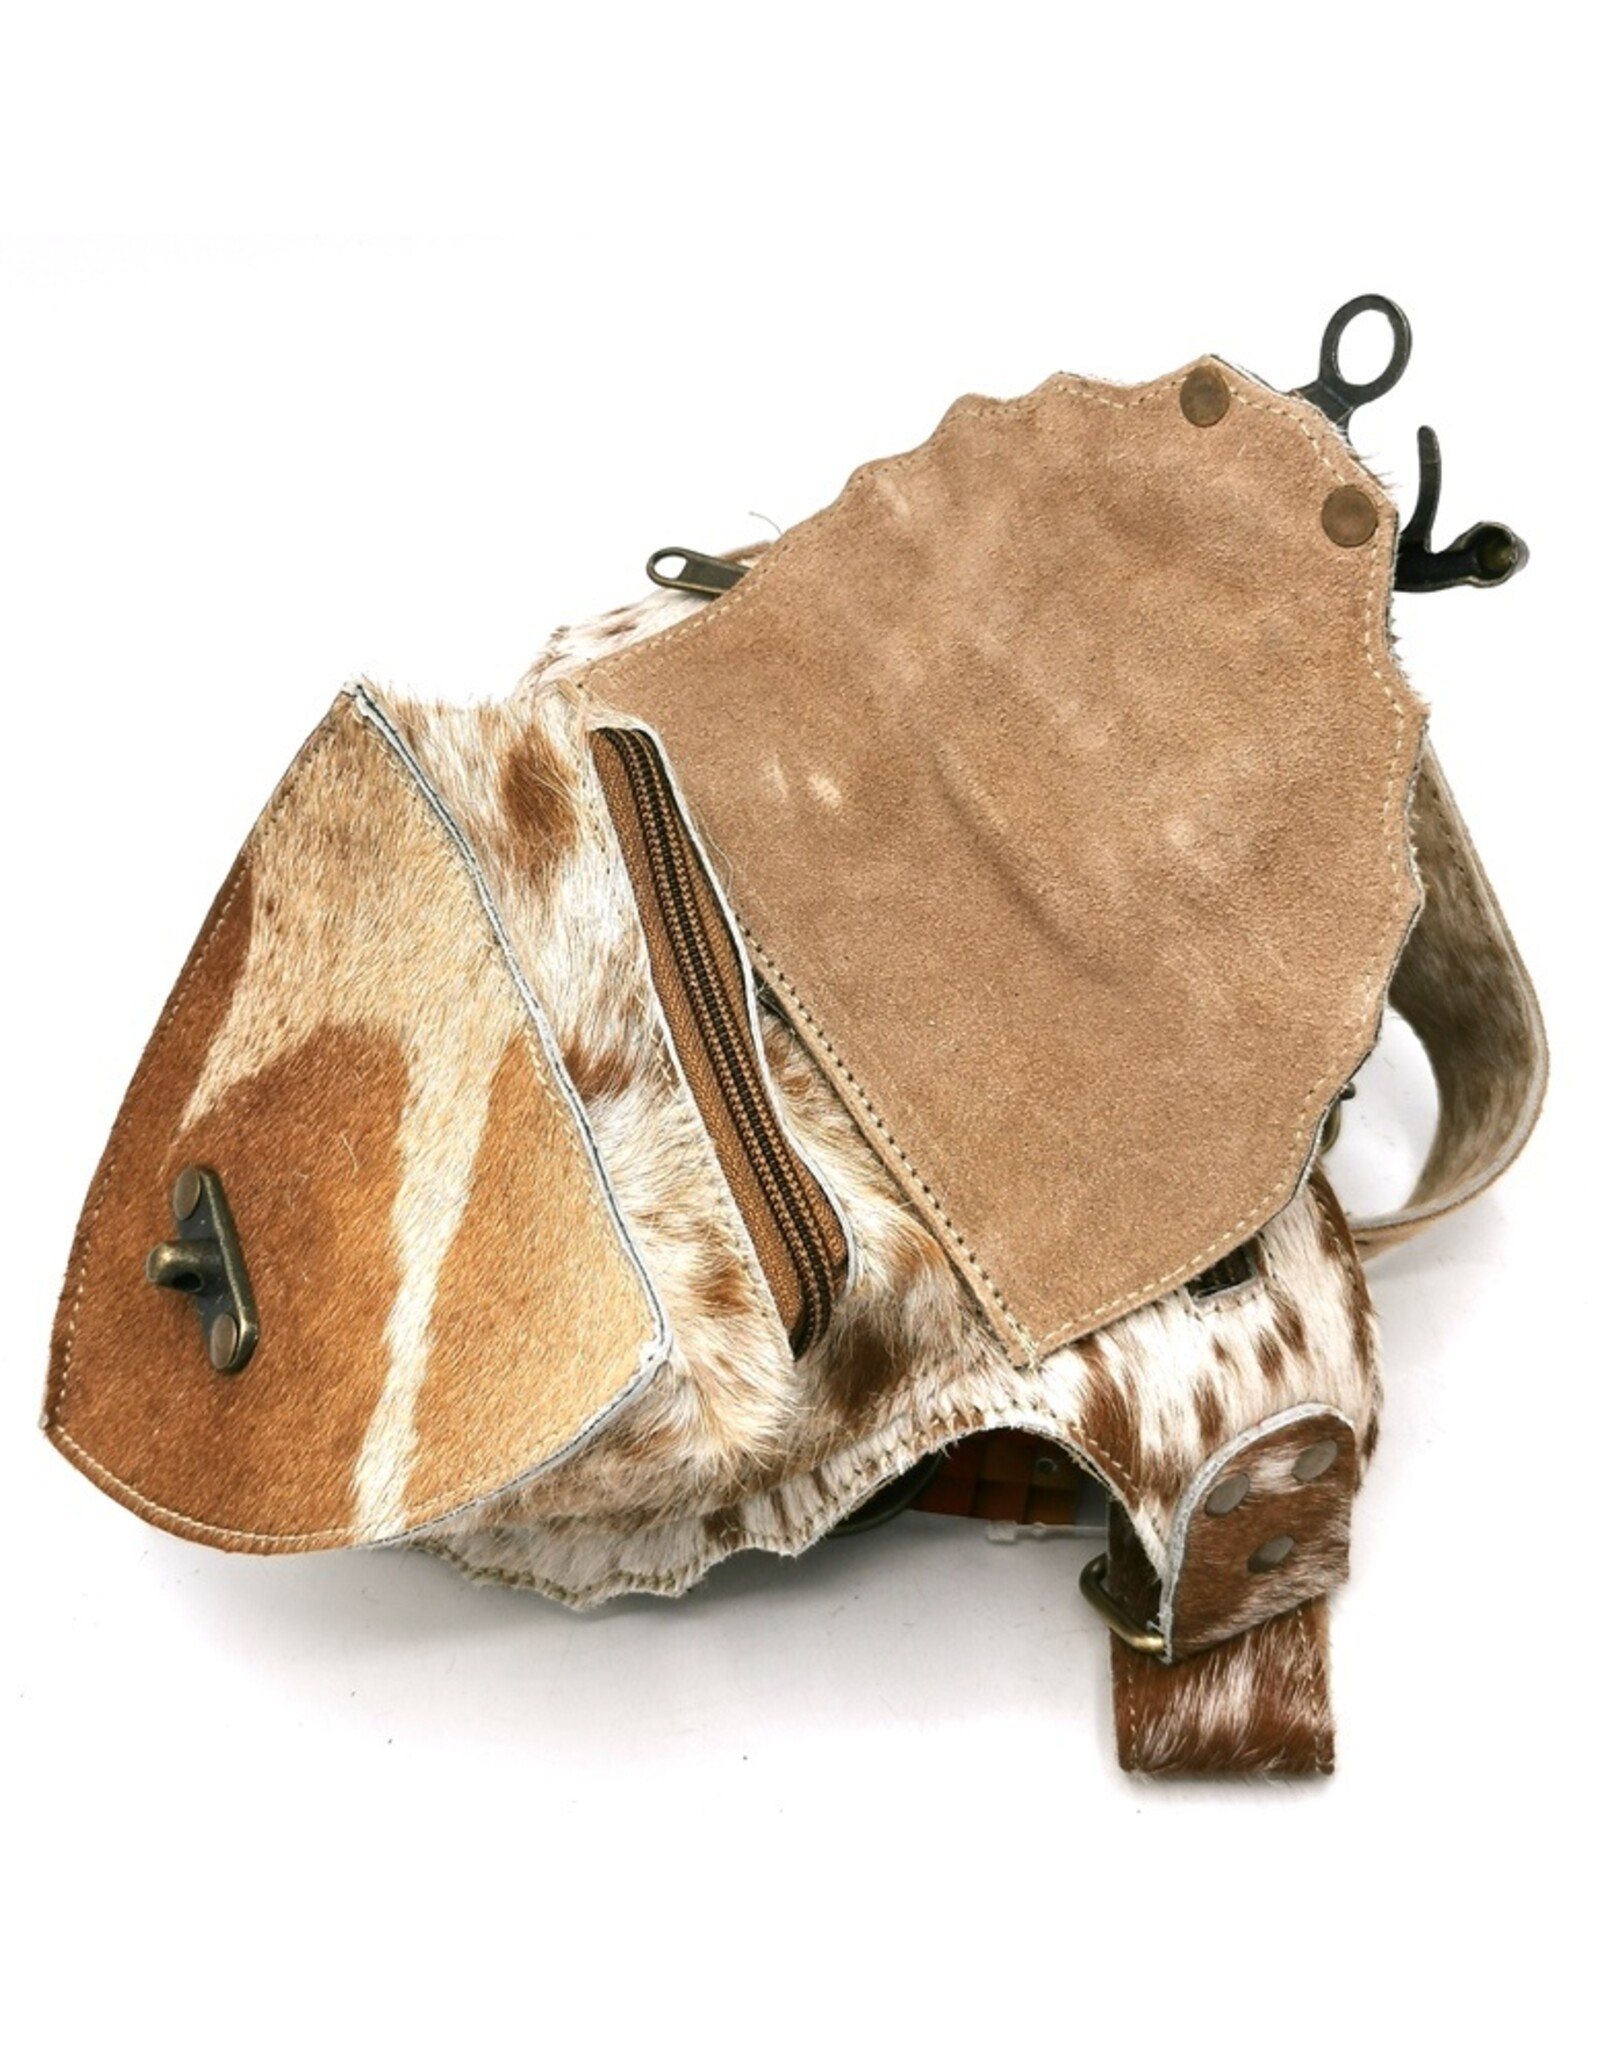 Trukado Leather Festival bags, waist bags and belt bags - Cowhide waist bag with hook and Turquoise stone Ibiza Style